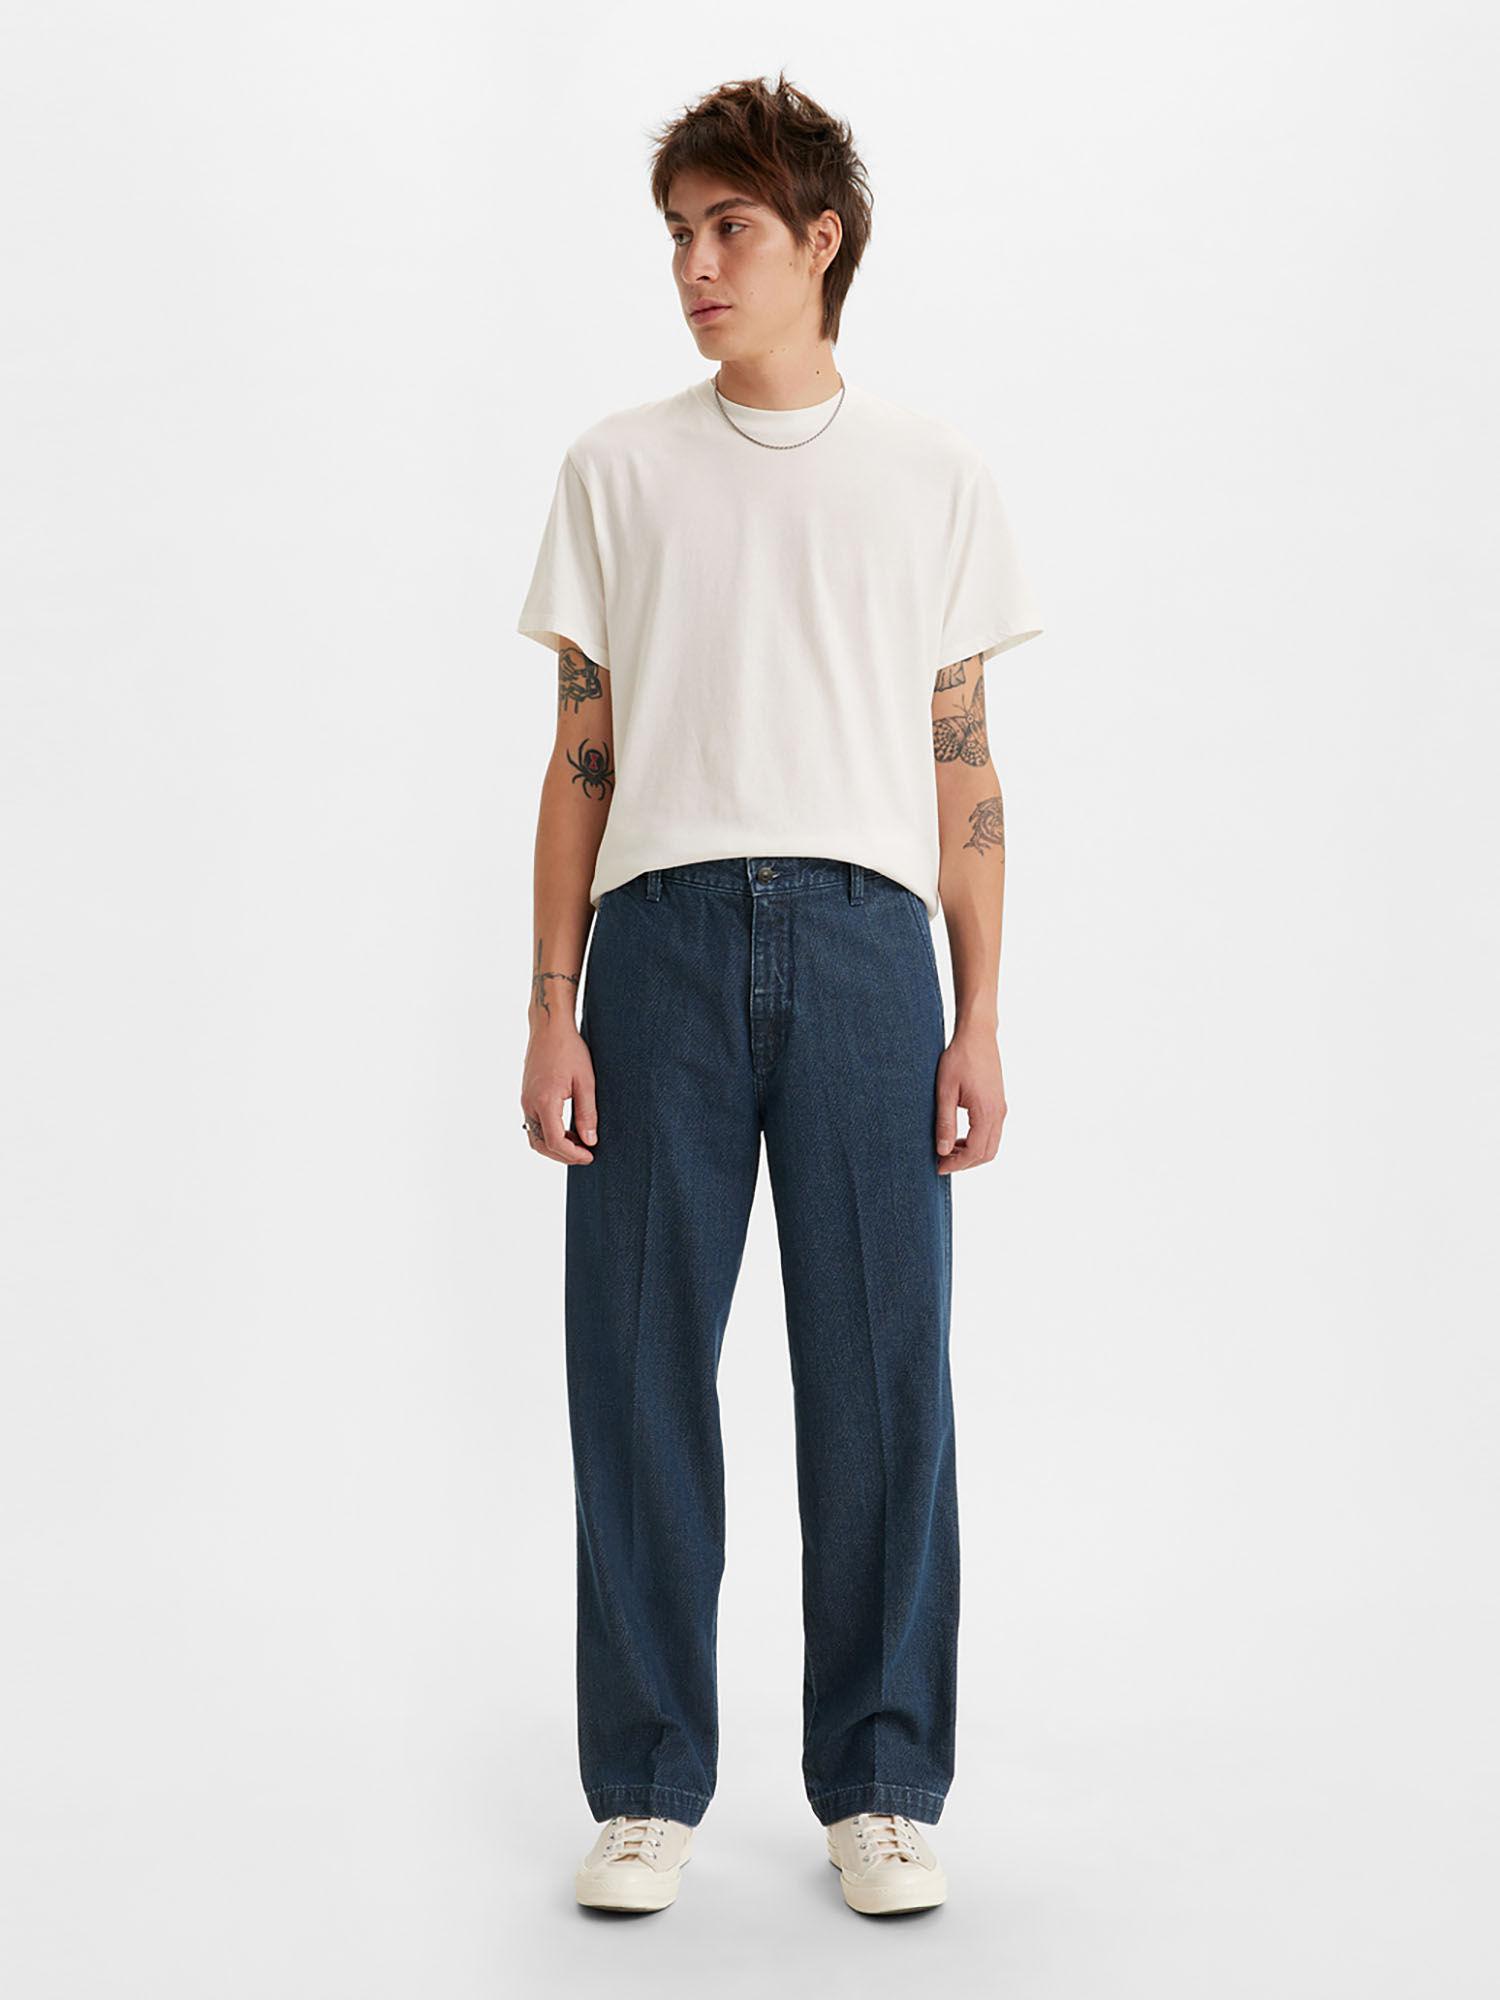 men straight fit chinos trousers